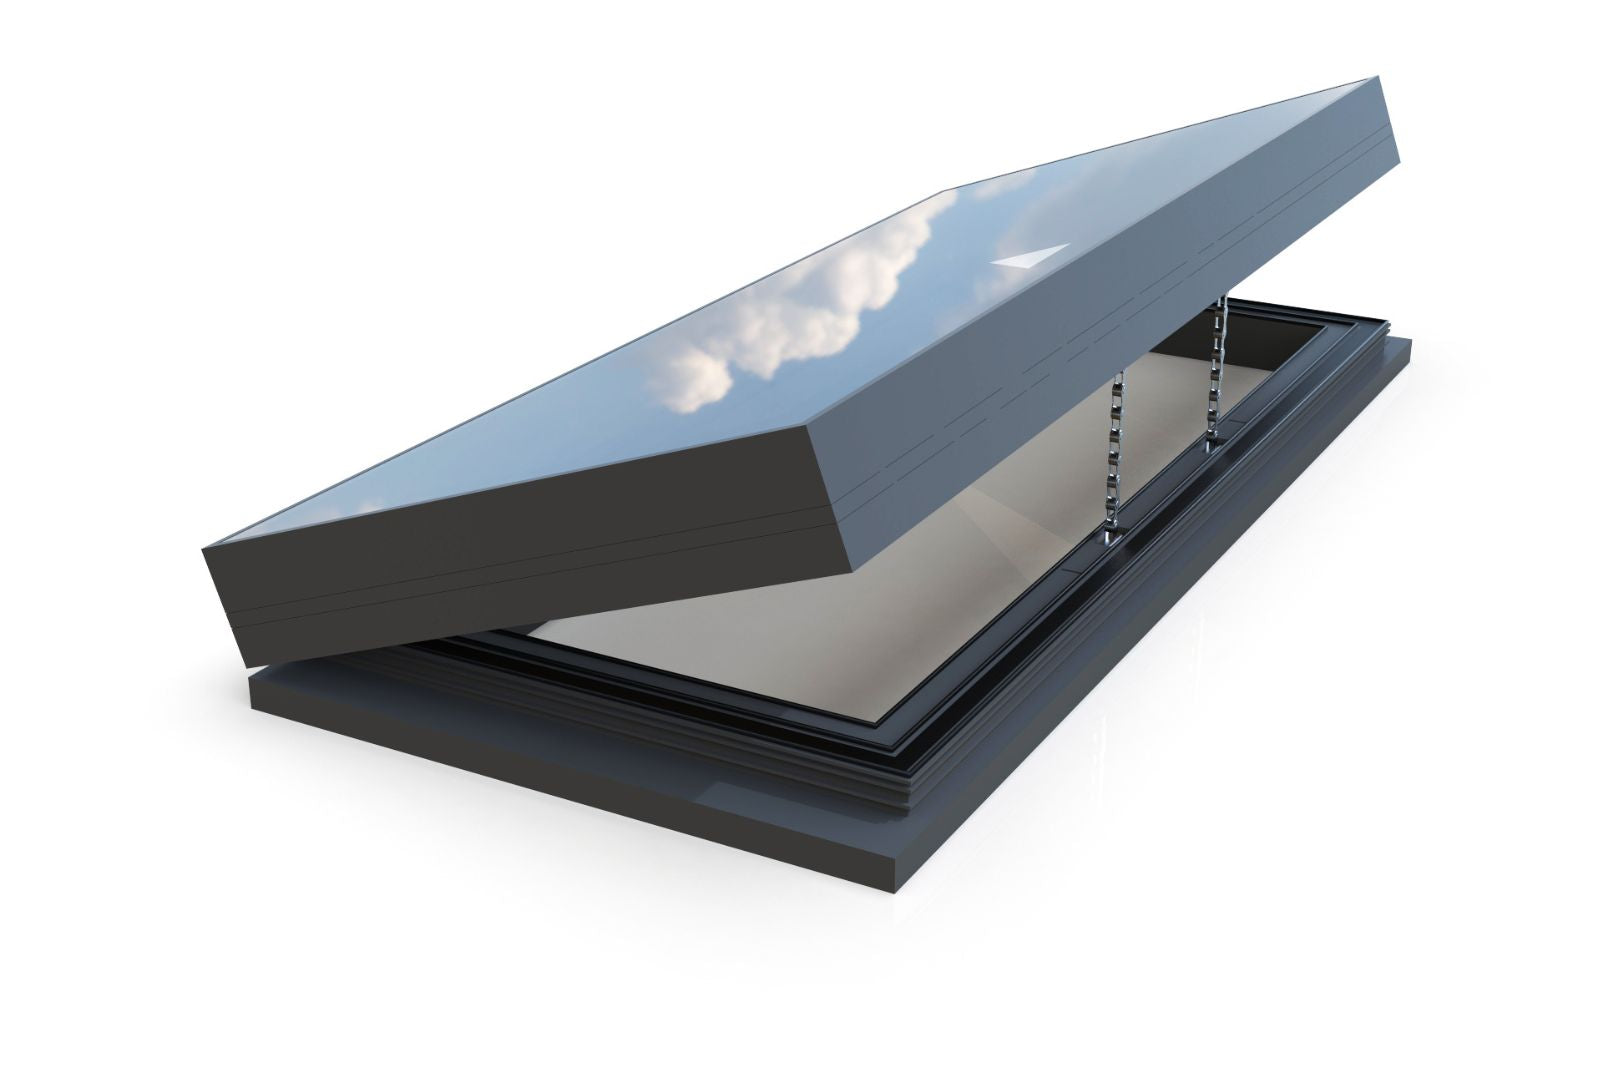 Electric Opening Skylight 600 x 1200mm